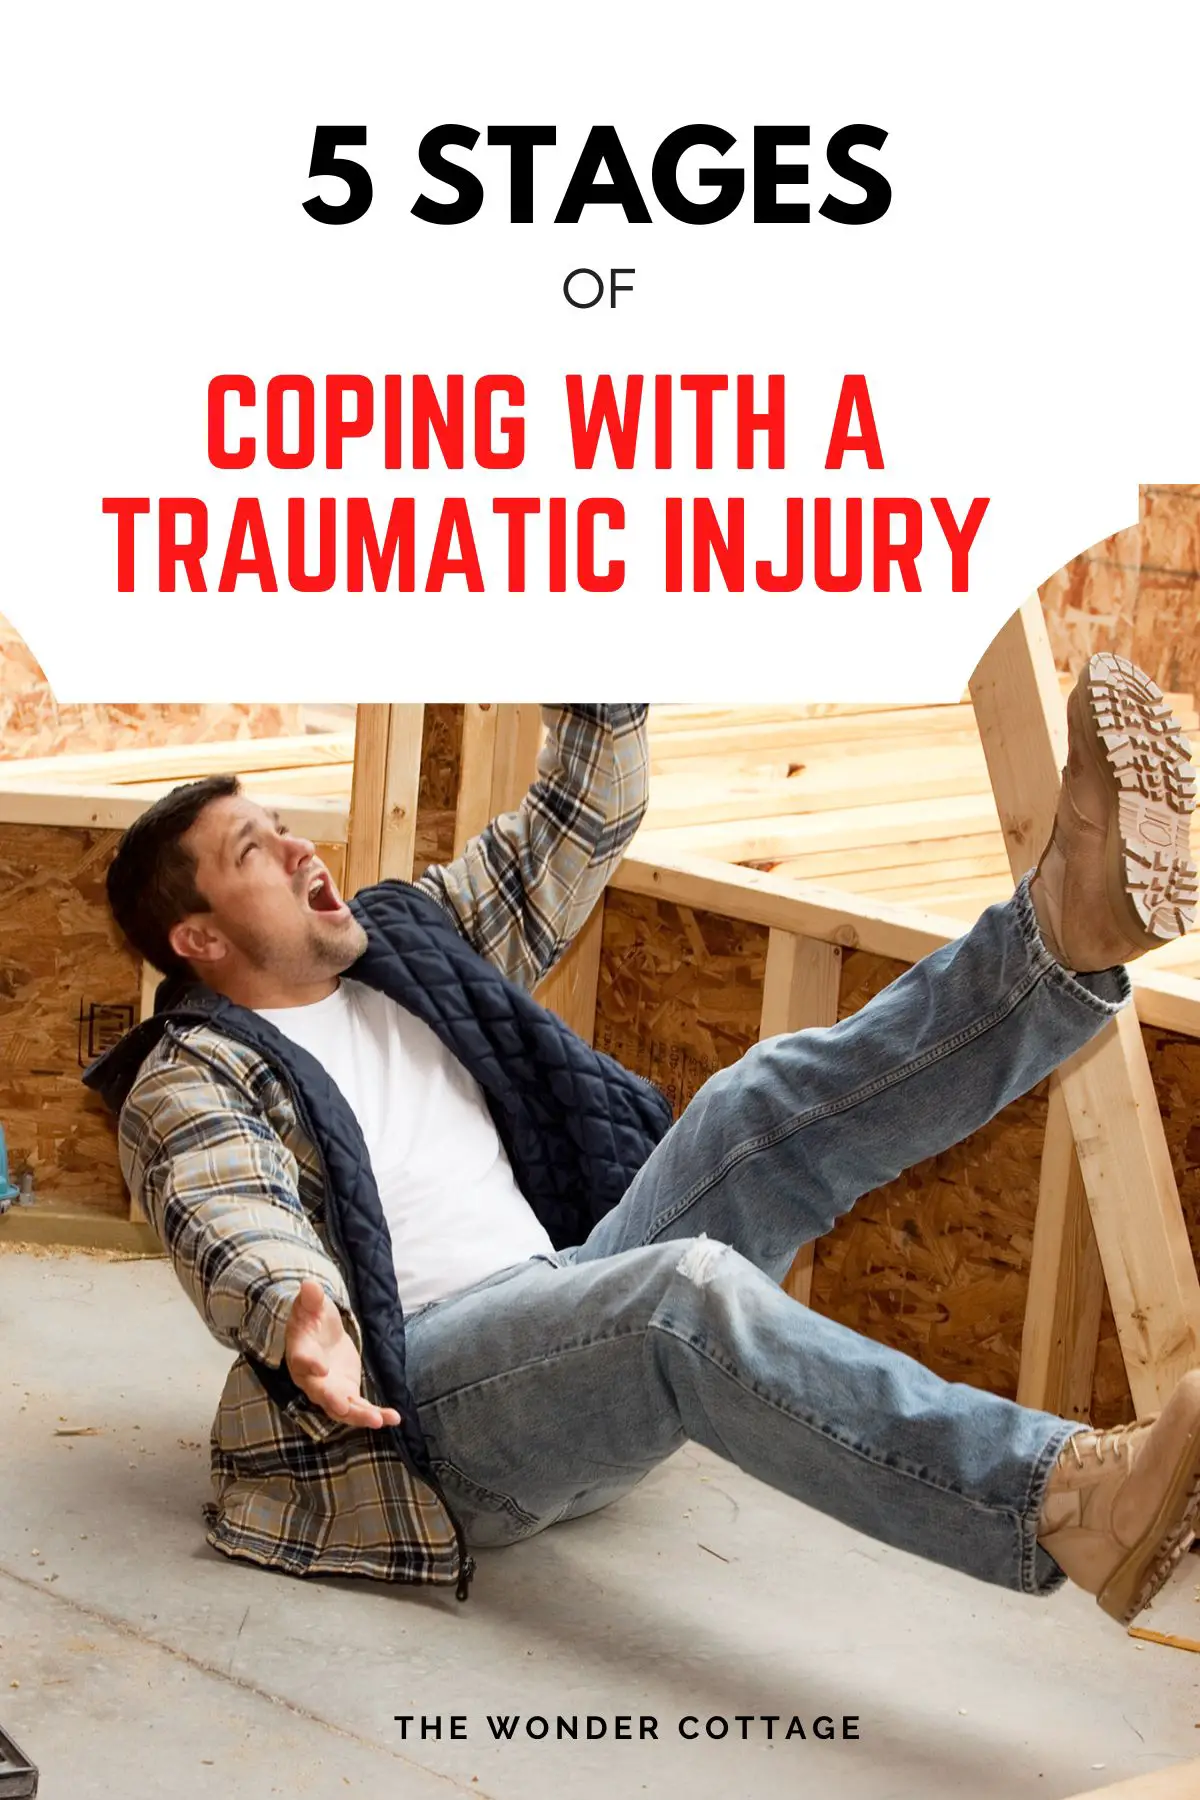 5 Stages Of Coping With A Traumatic Injury